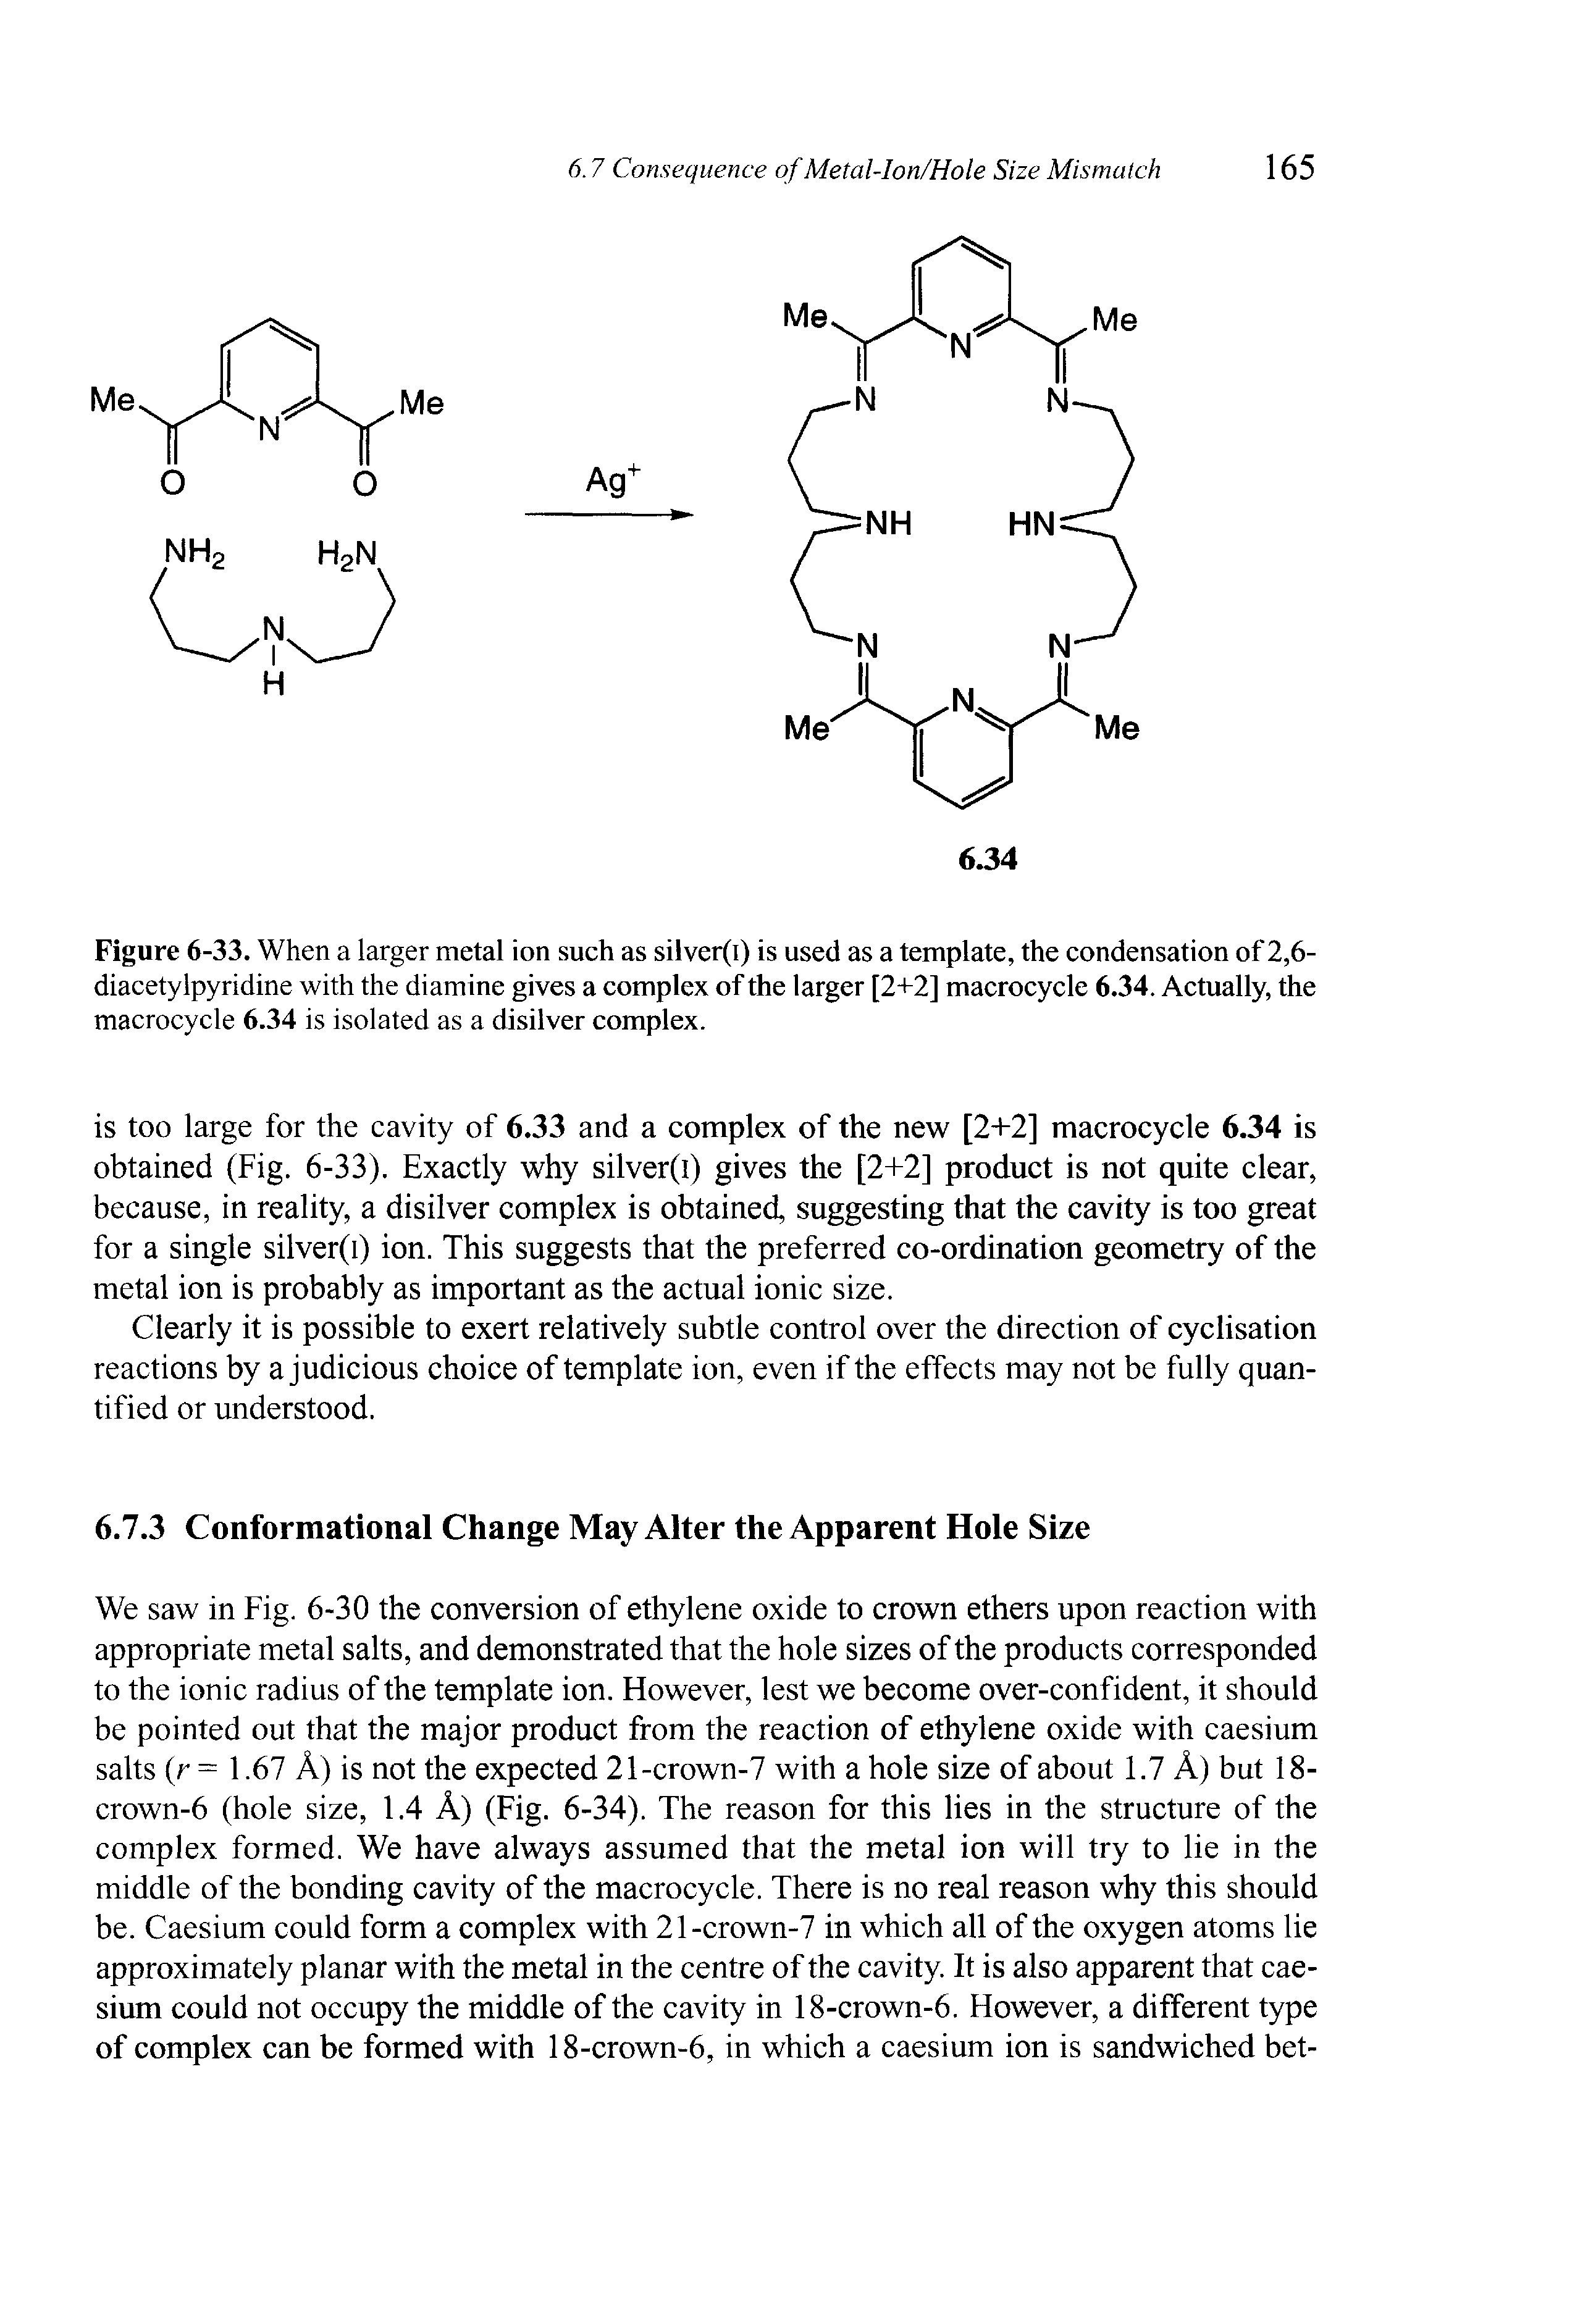 Figure 6-33. When a larger metal ion such as silver(i) is used as a template, the condensation of 2,6-diacetylpyridine with the diamine gives a complex of the larger [2+2] macrocycle 6.34. Actually, the macrocycle 6.34 is isolated as a disilver complex.